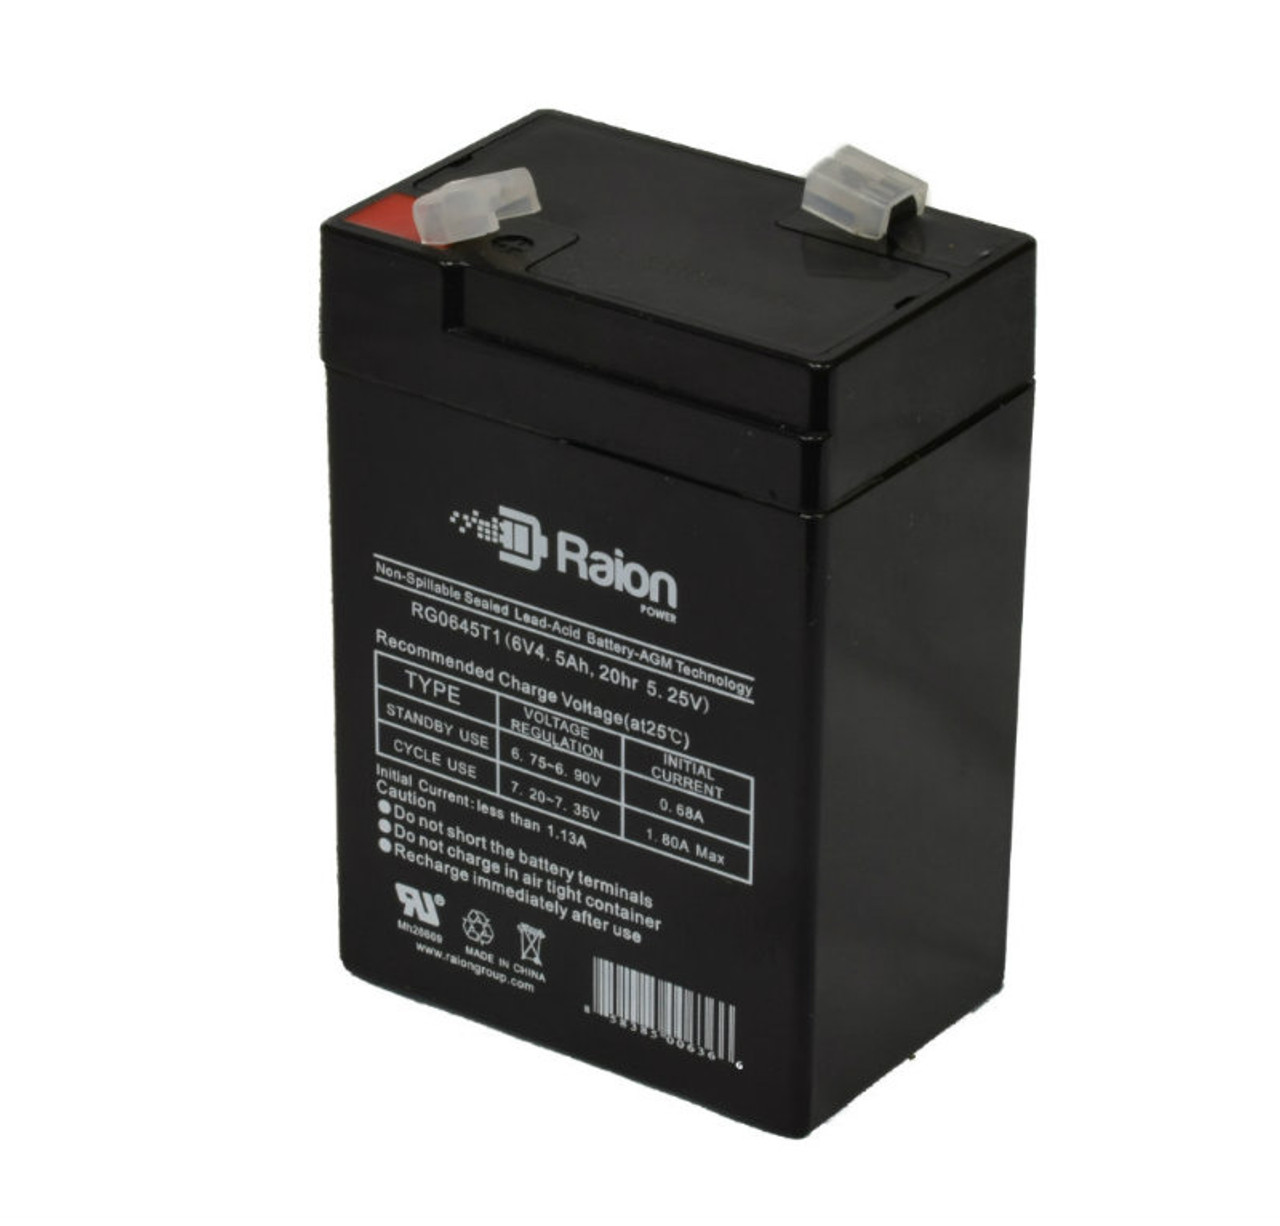 Raion Power RG0645T1 6V 4.5Ah Replacement Battery Cartridge for R&D 5637